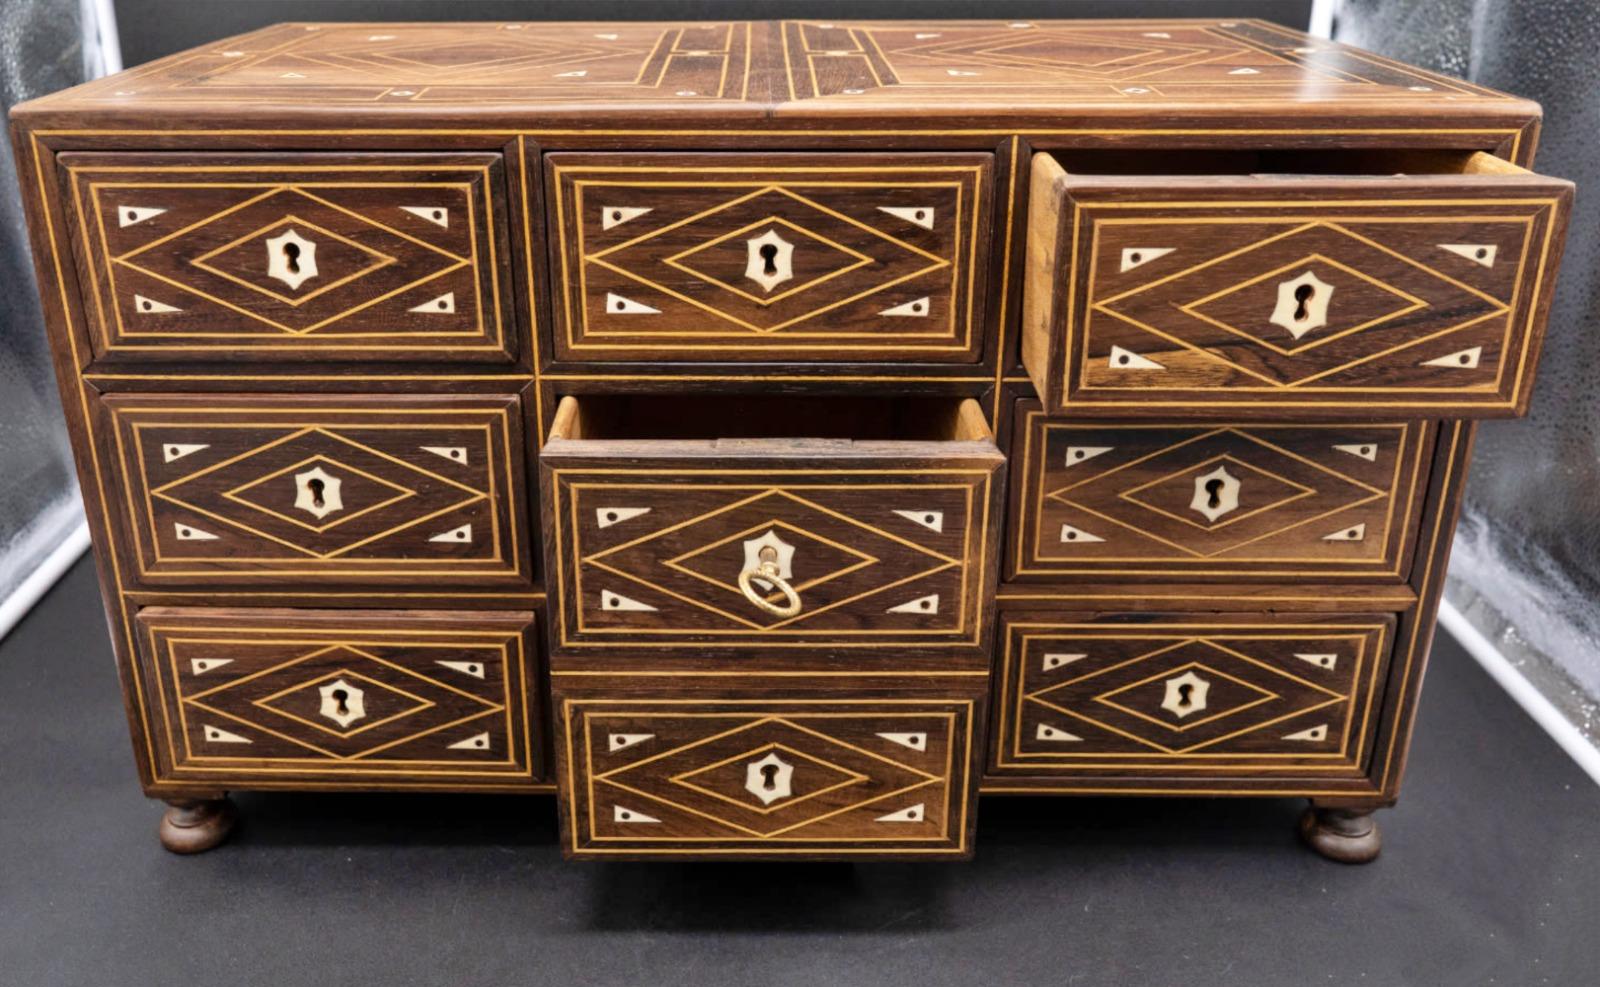 Italian cabinet 19th Century in Rosewood

With inlays in wood and noble material.
With eight drawers, with golden metal handles on the side, 
in good condition. 
32cm * 52.5cm * 27.5cm.



